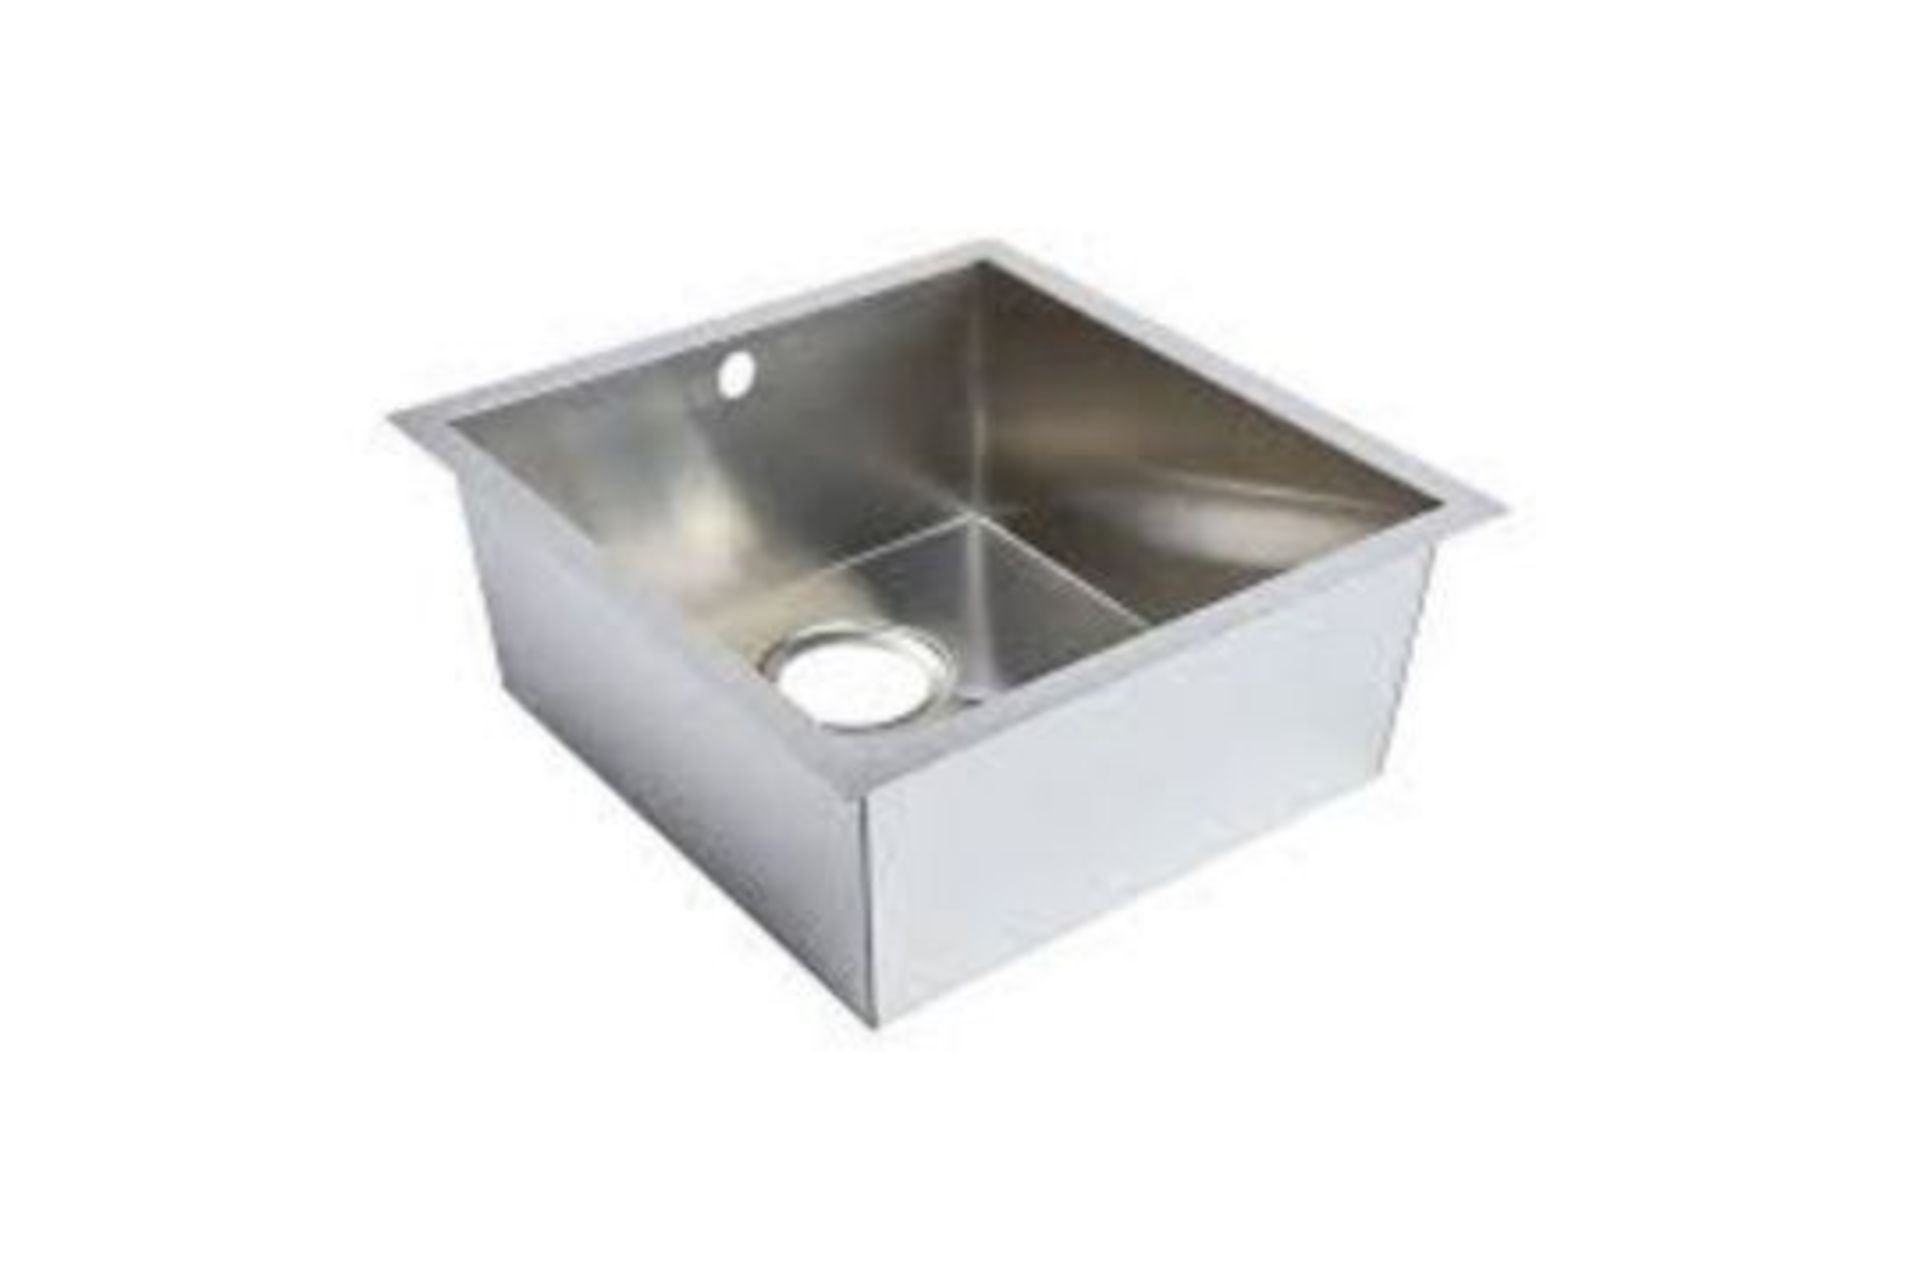 3 X BRAND NEW COOKE AND LEWIS CAJAL STAINLESS STEEL 1 BOWL SINKS RRP £95 EACH R12